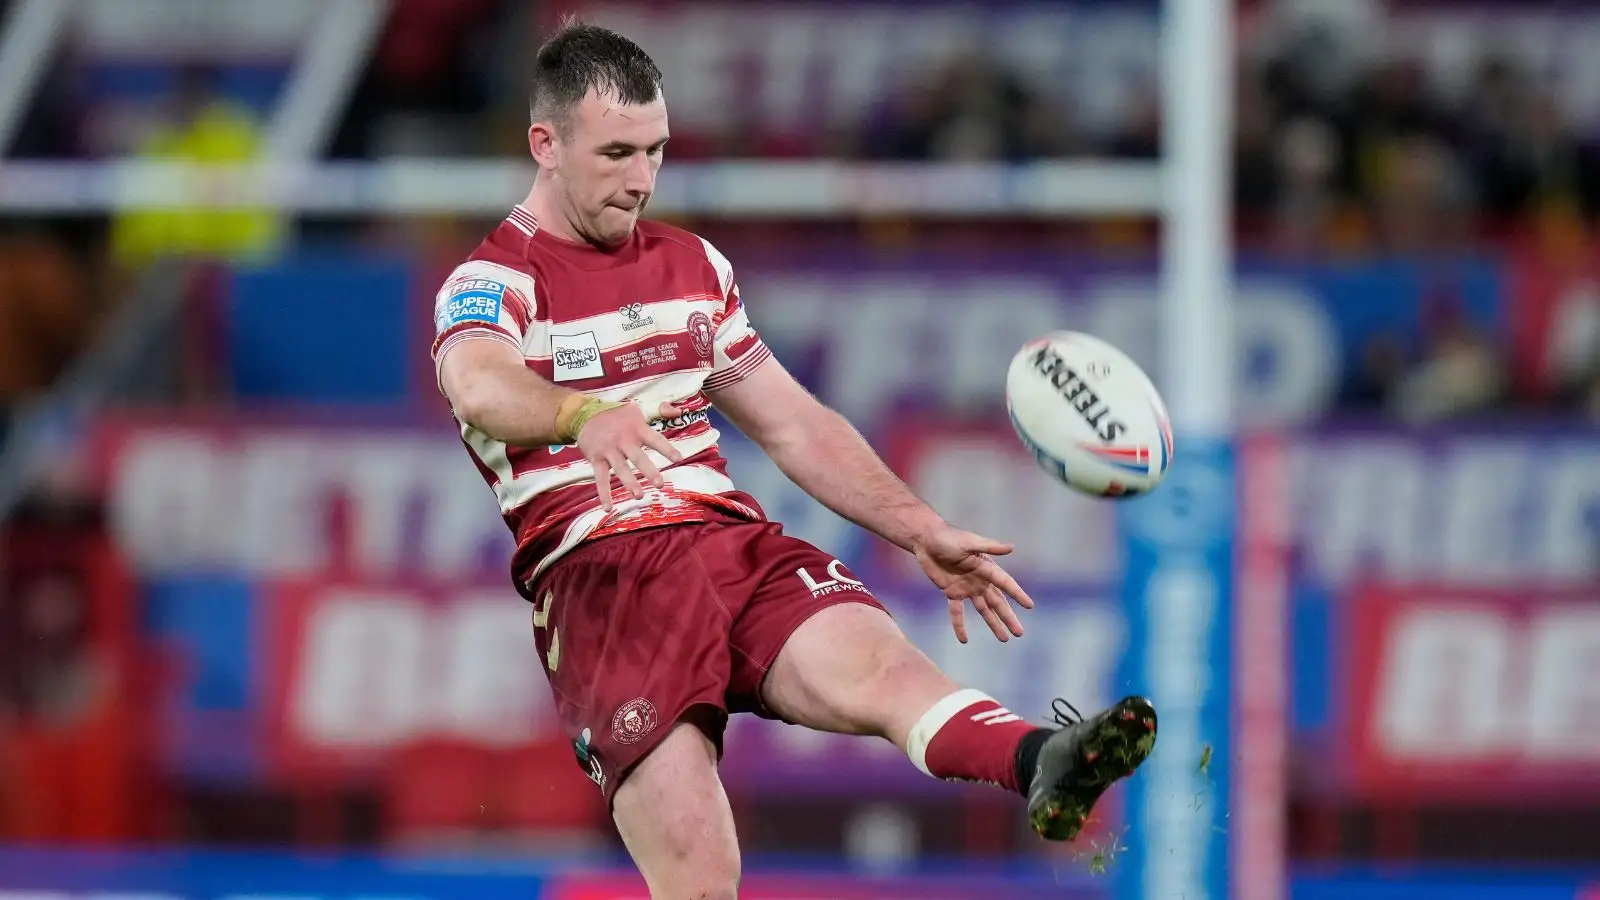 Wigan Warriors’ Harry Smith provides unique insight into his on-field kicking game